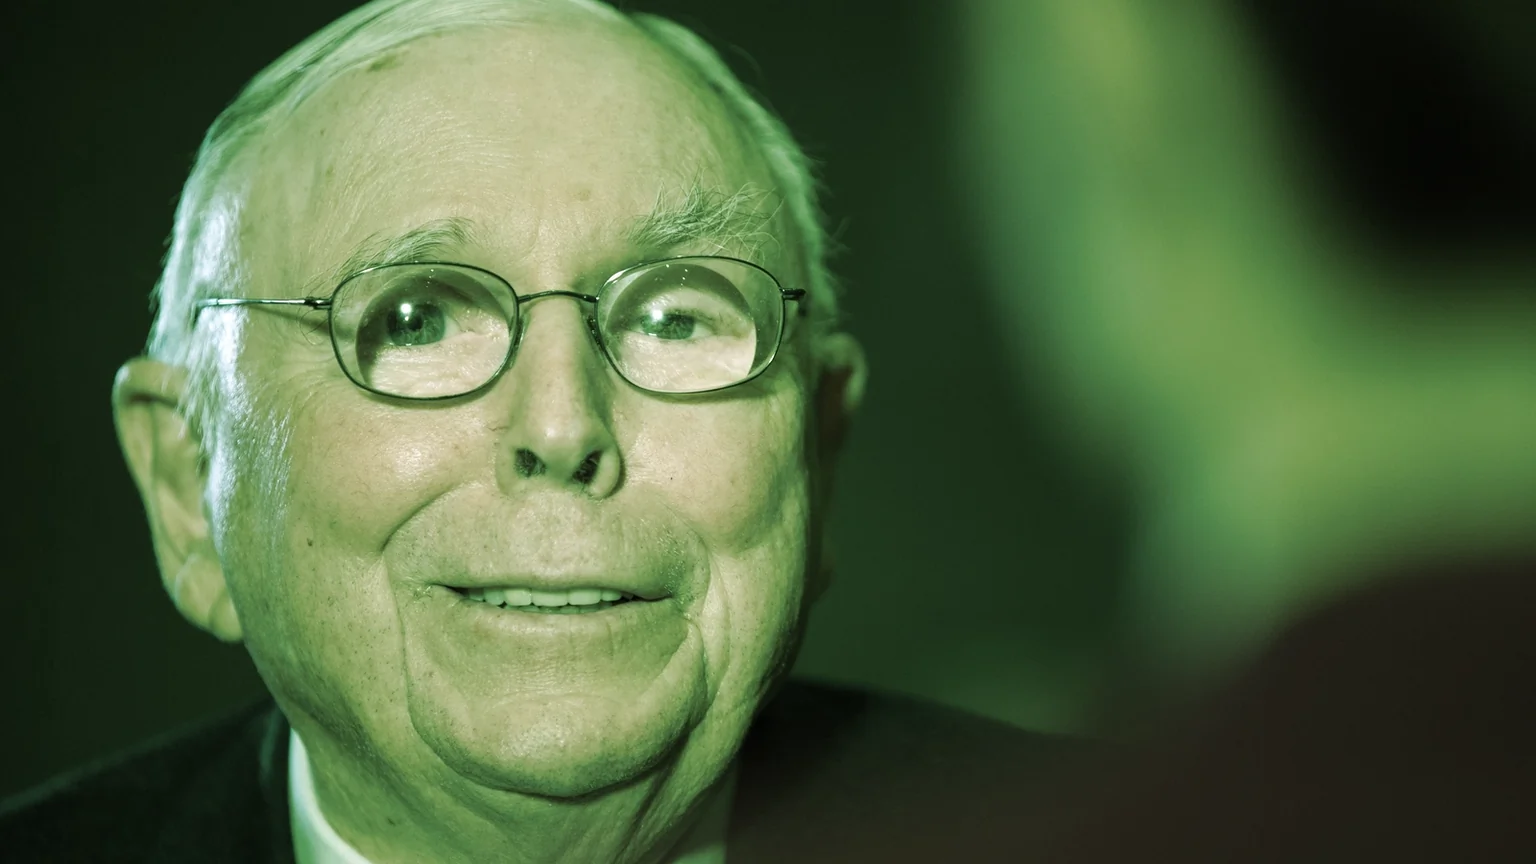 Charlie Munger is repulsed by your Bitcoin. Image: Shutterstock